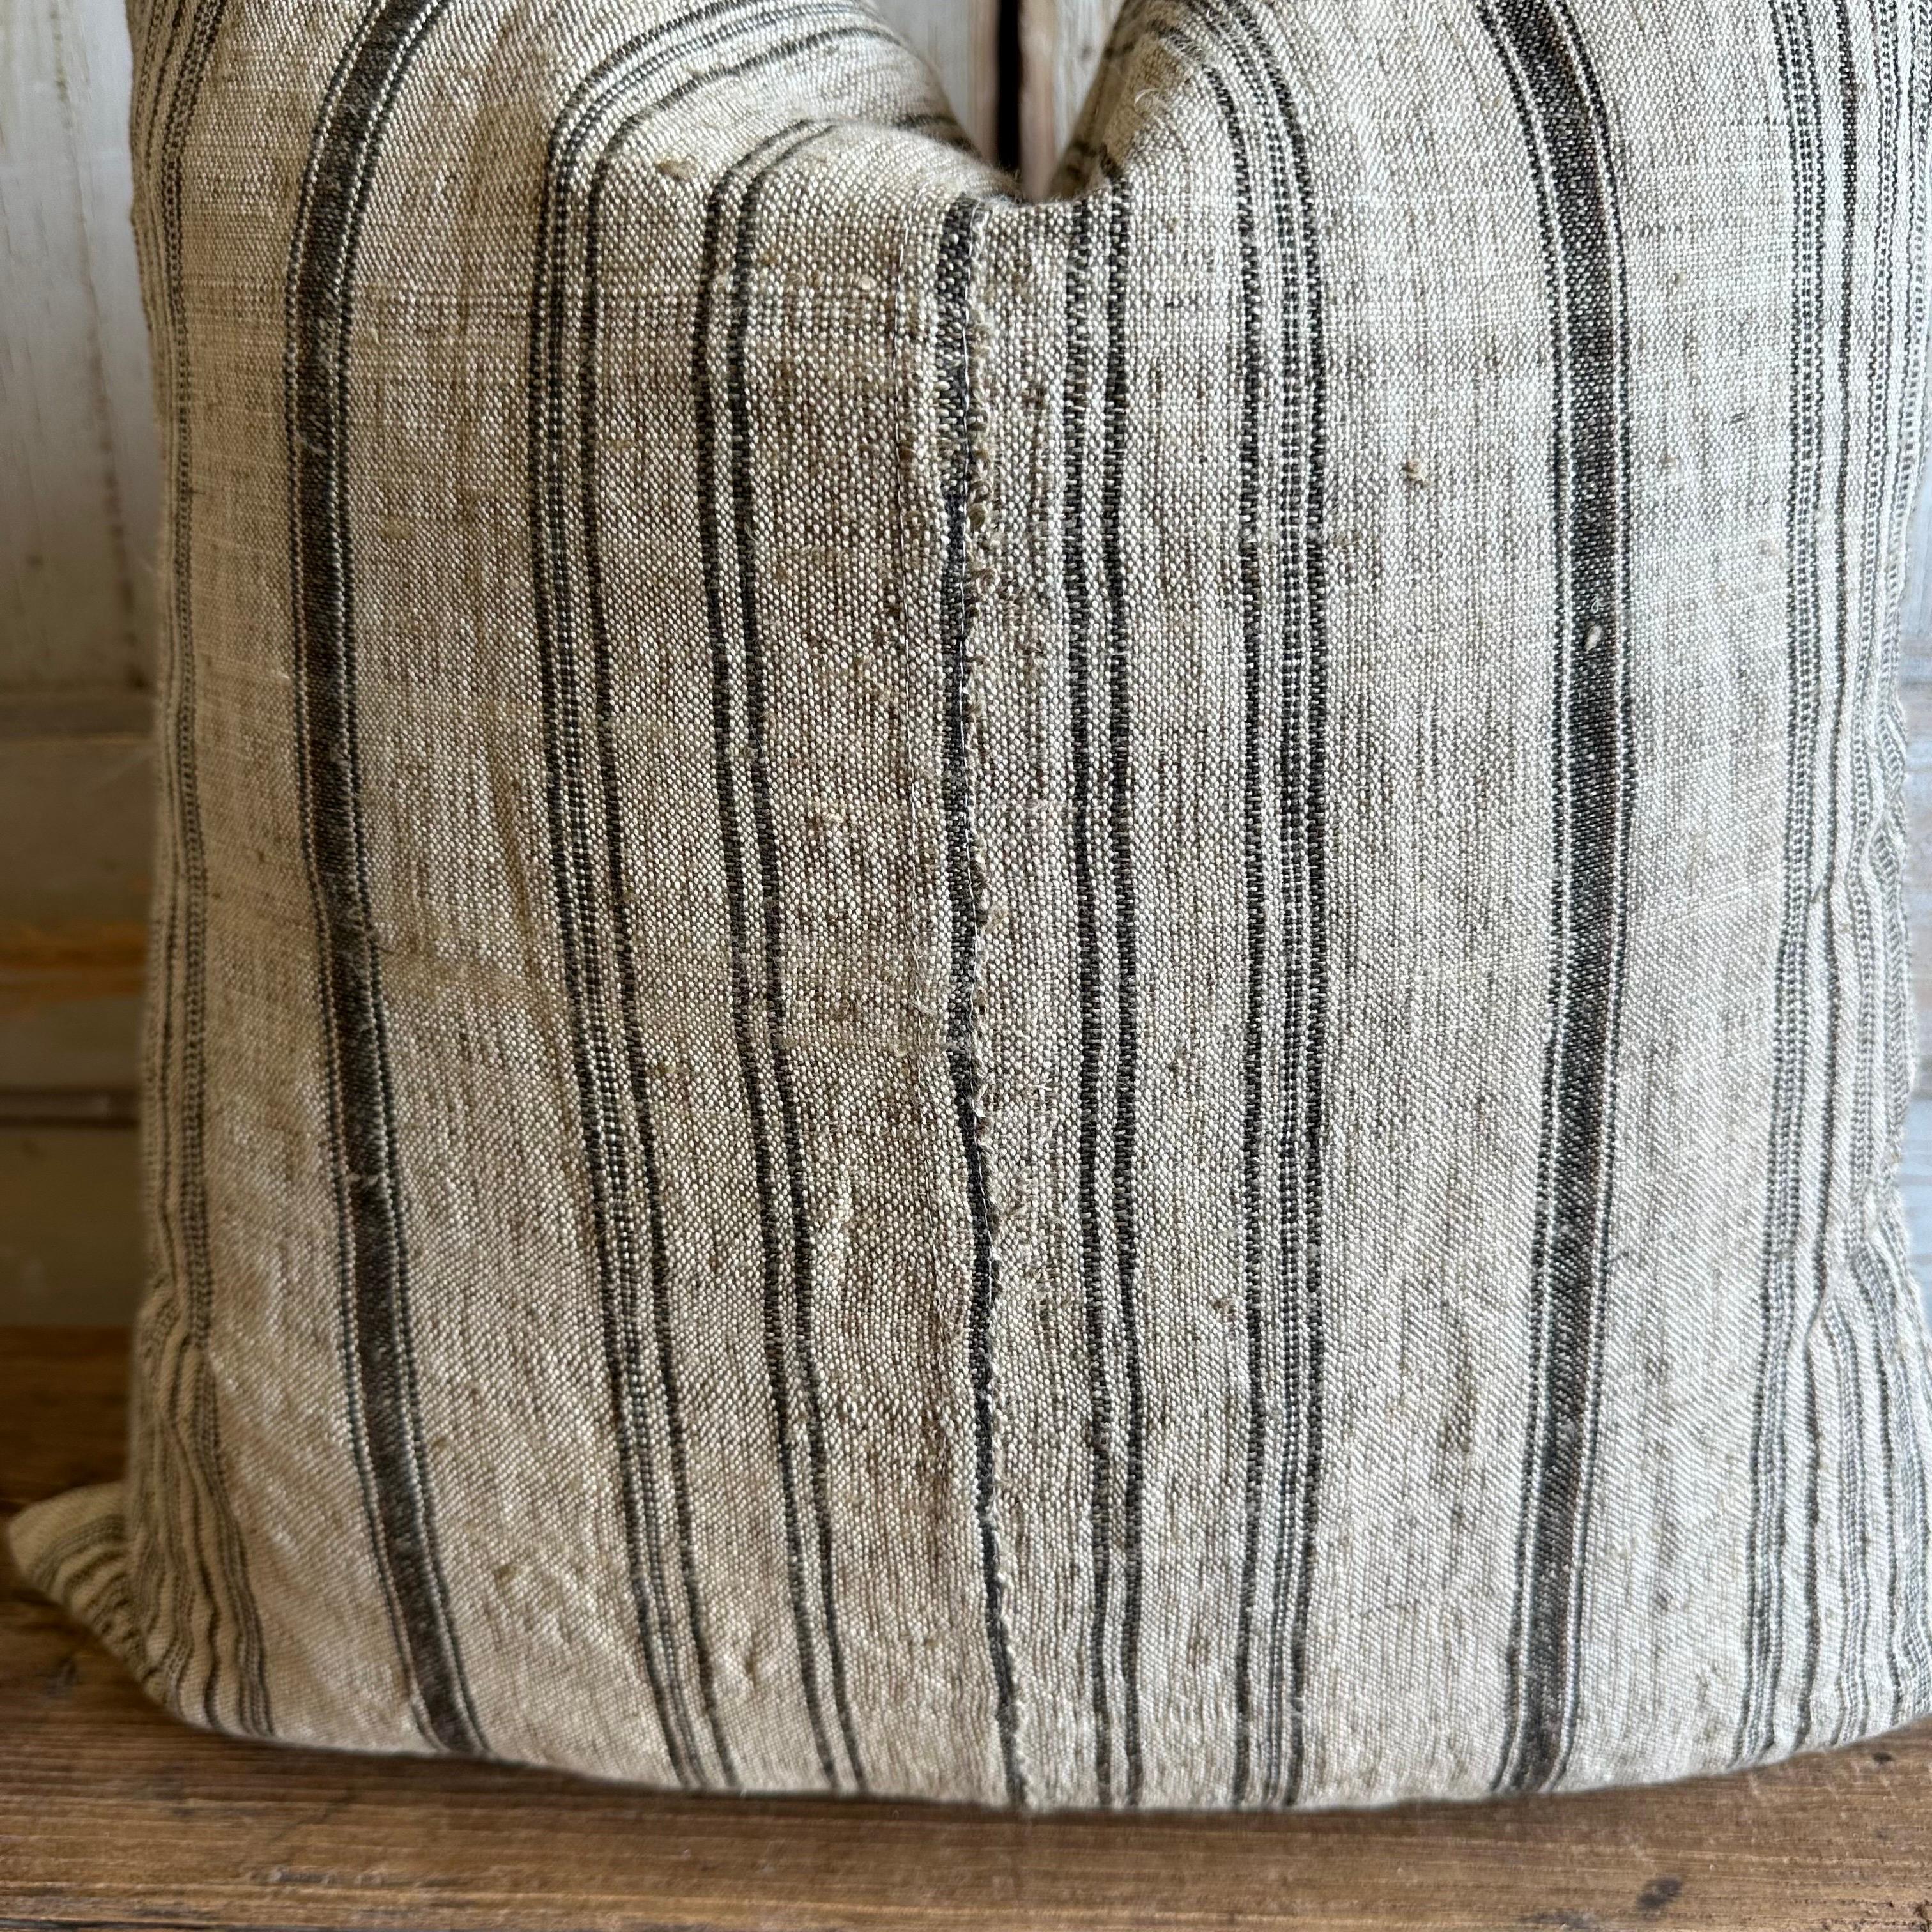 Custom Made Linen Stripe Pillows in Oatmeal with Chocolate Stripes For Sale 2